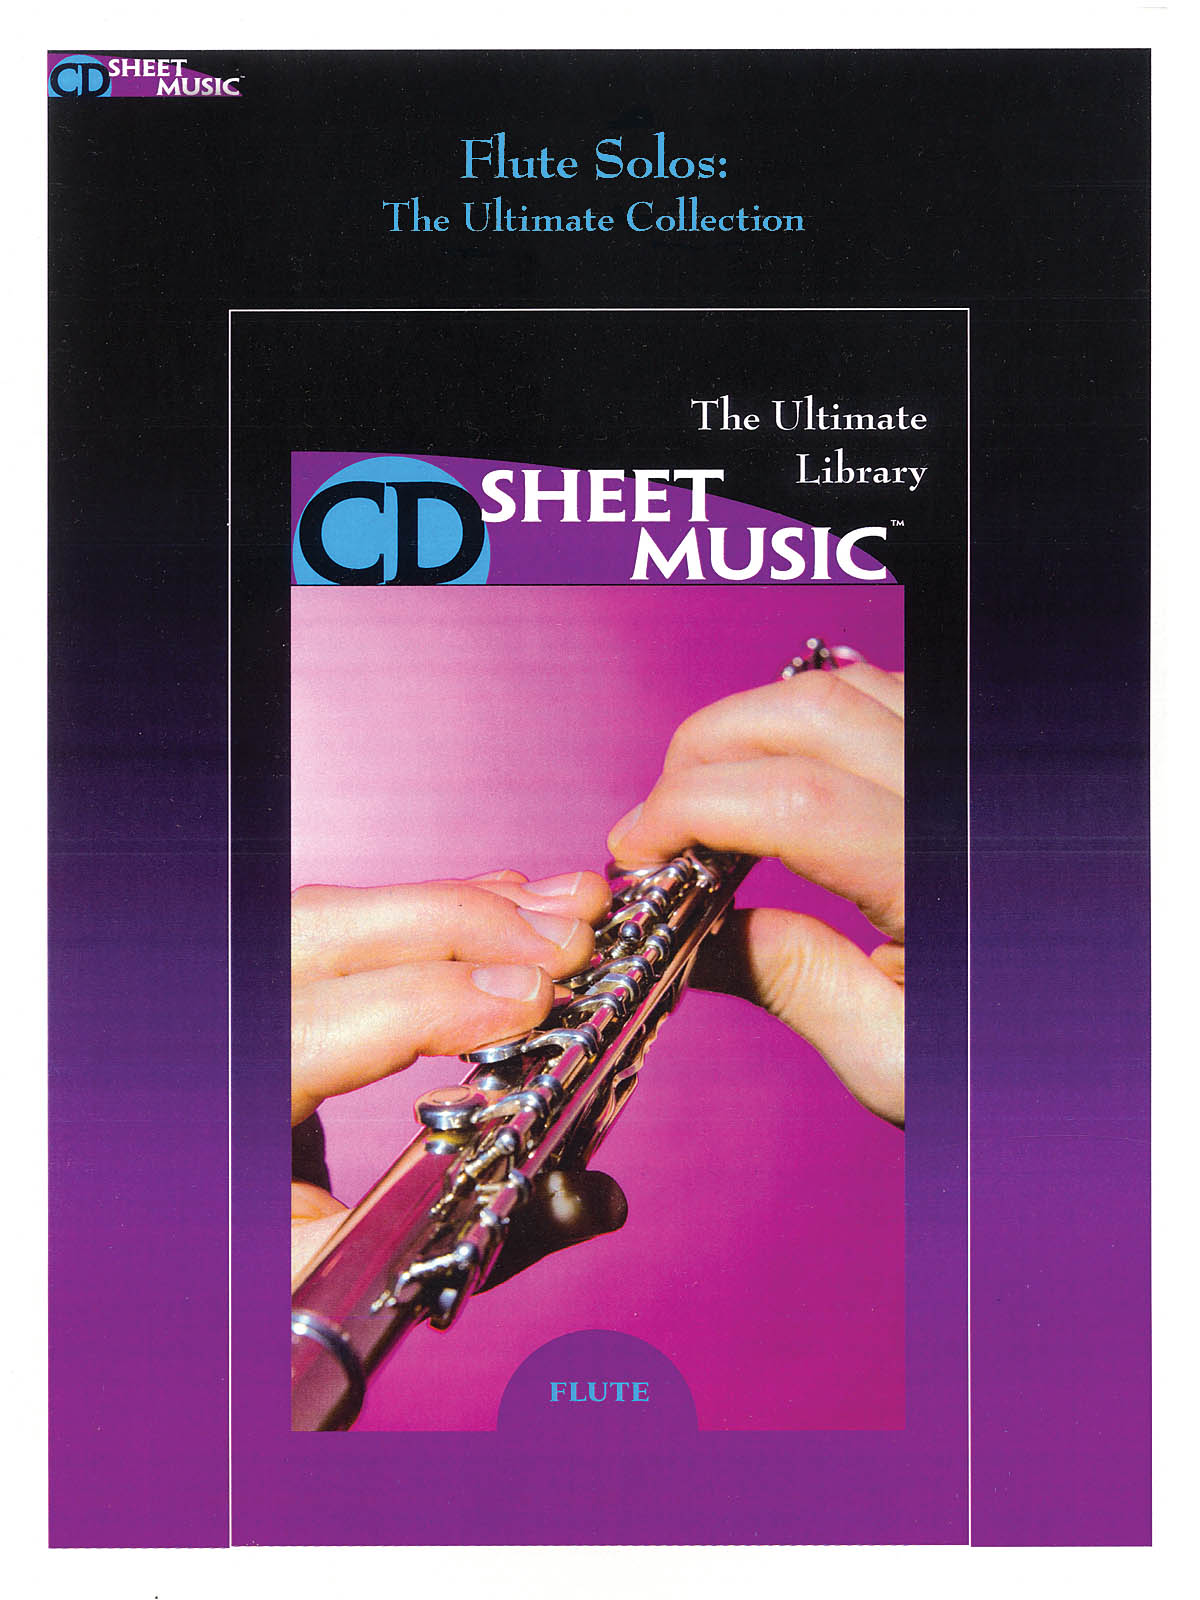 Flute Solos: The Ultimate Collection